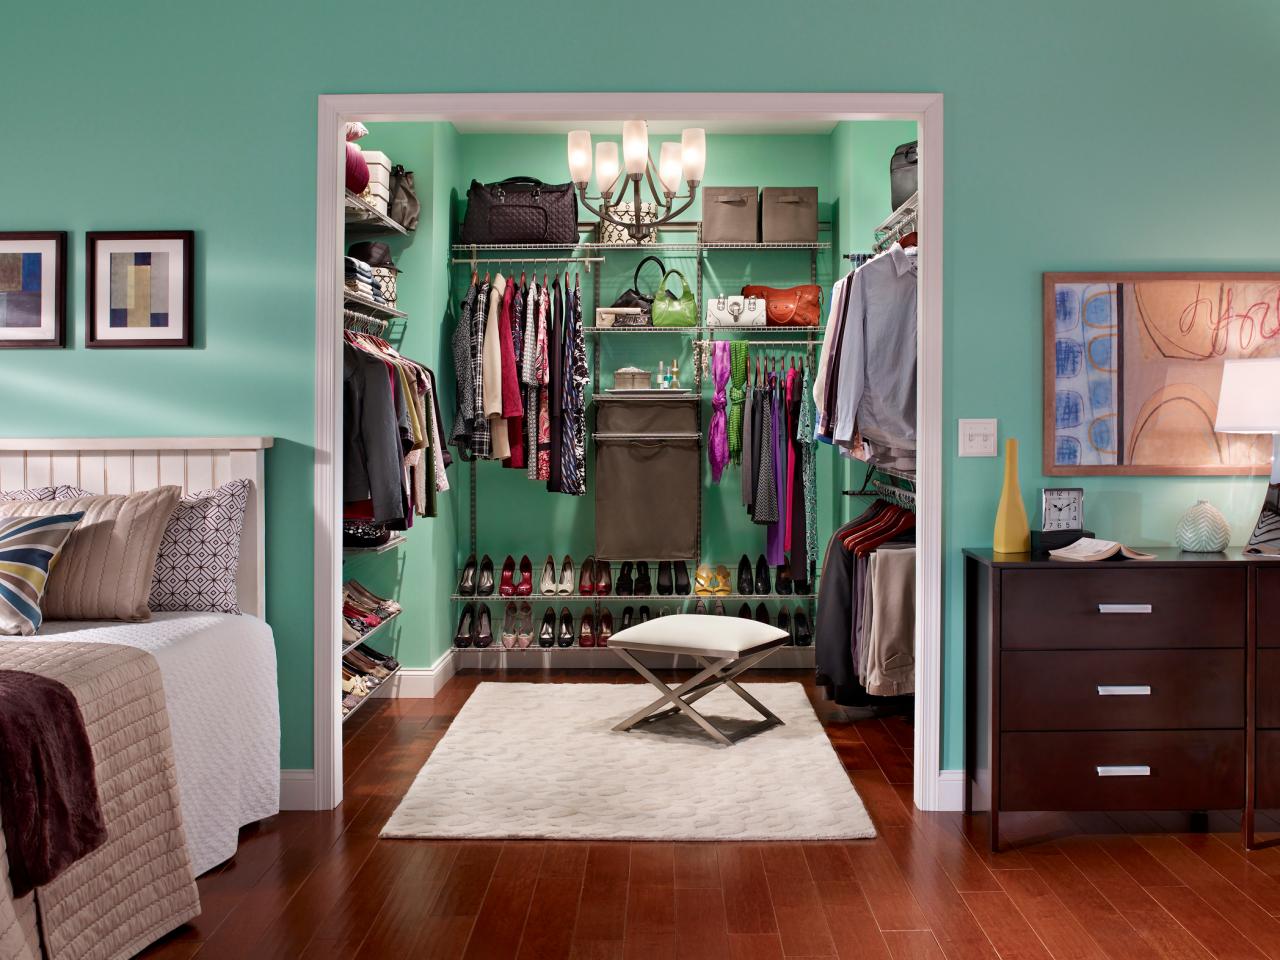 Closet Costs And Budget What You Need To Know Hgtv,Somethings Gotta Give House Plan